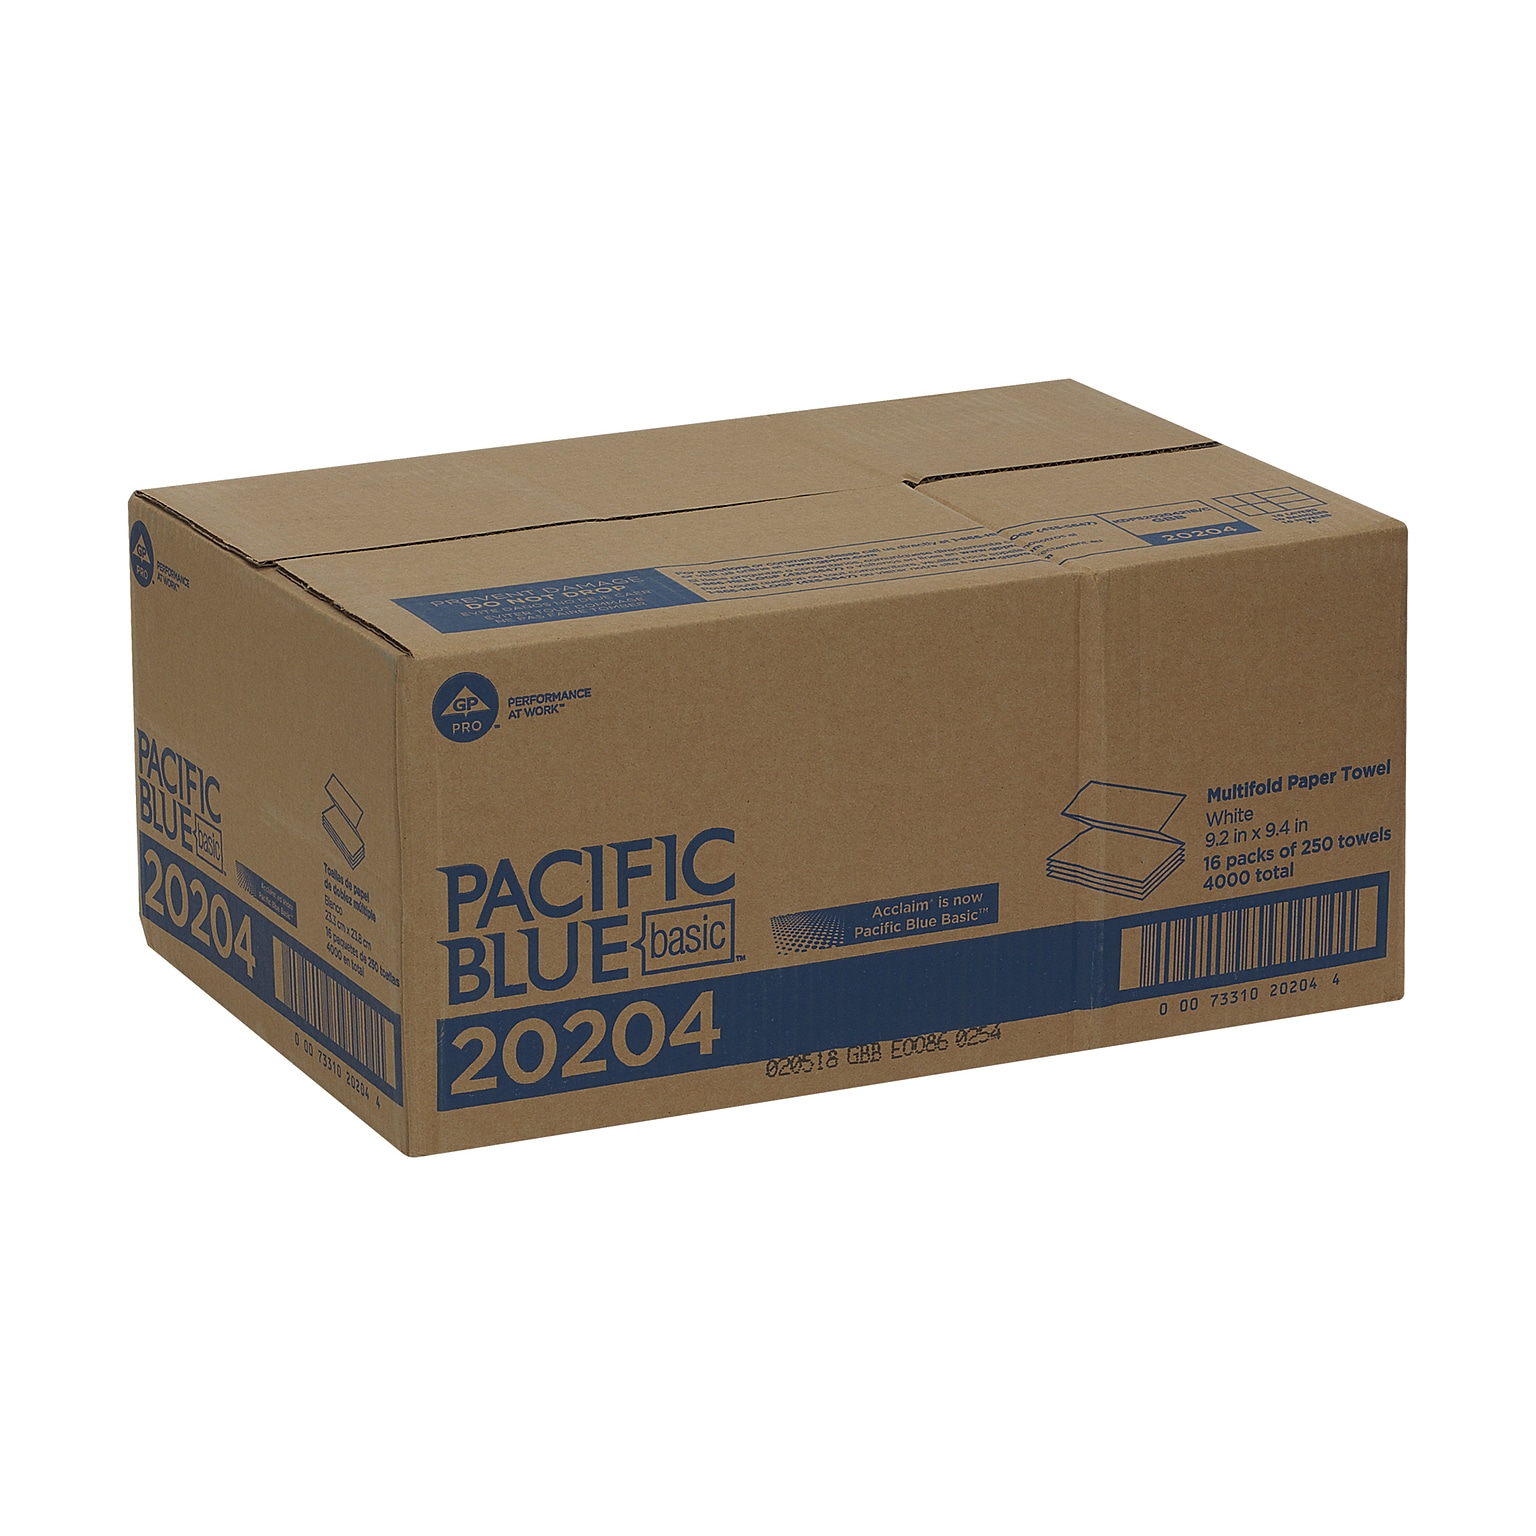 Pacific Blue Basic Multifold Paper Towels, 1-ply, 250 Sheets/Pack, 16 Packs/Carton (20204)